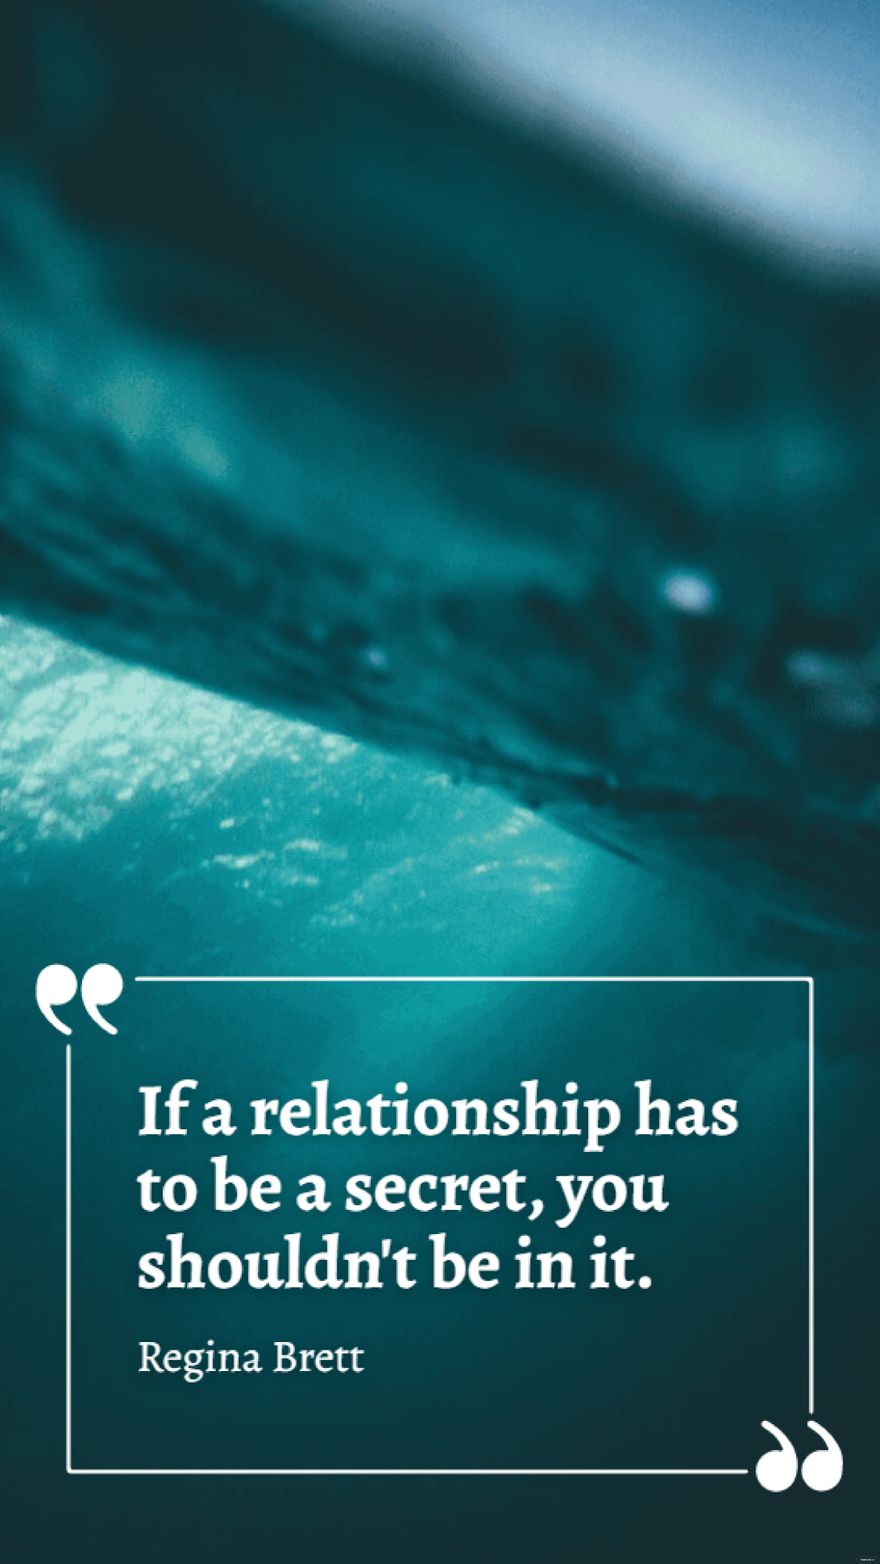 Regina Brett - If a relationship has to be a secret, you shouldn't be in it.